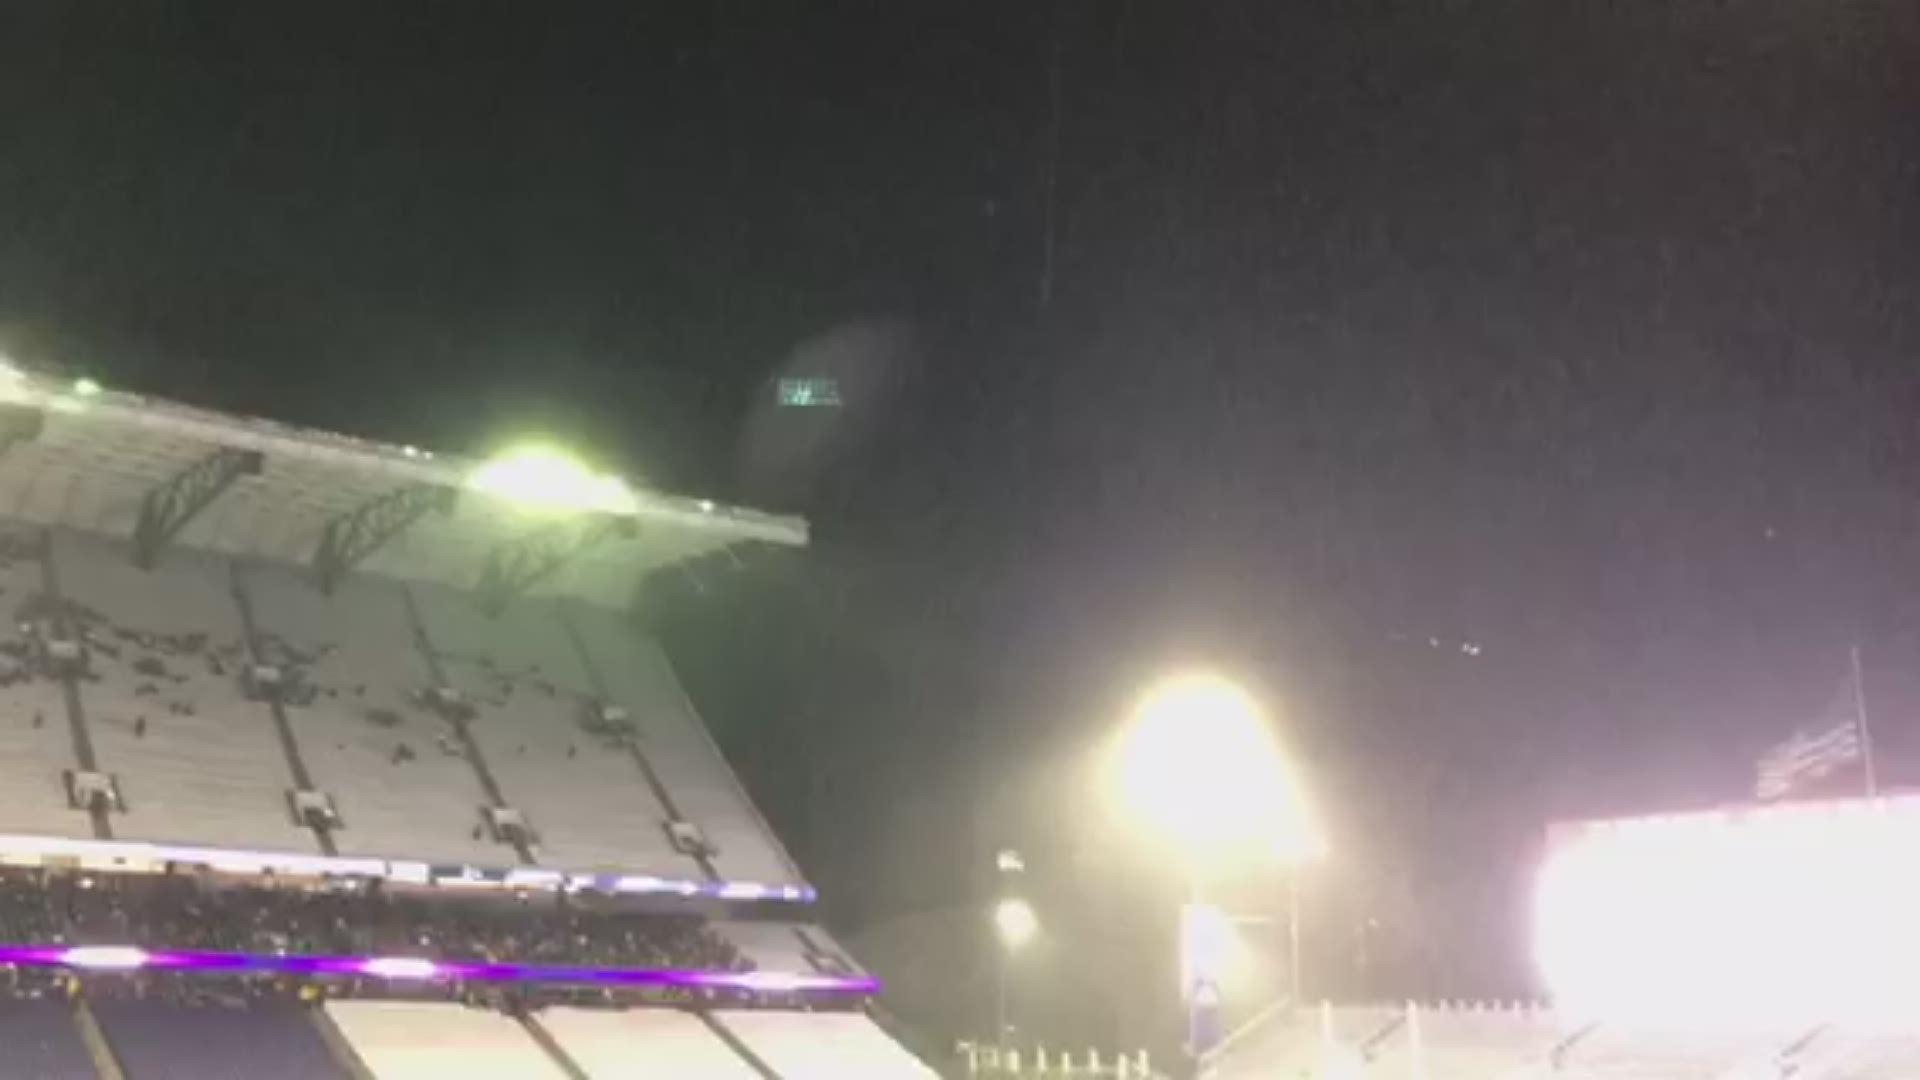 A major storm moved through the Puget Sound area Saturday night, causing power outages, street flooding, and the delay of the Washington-California game.